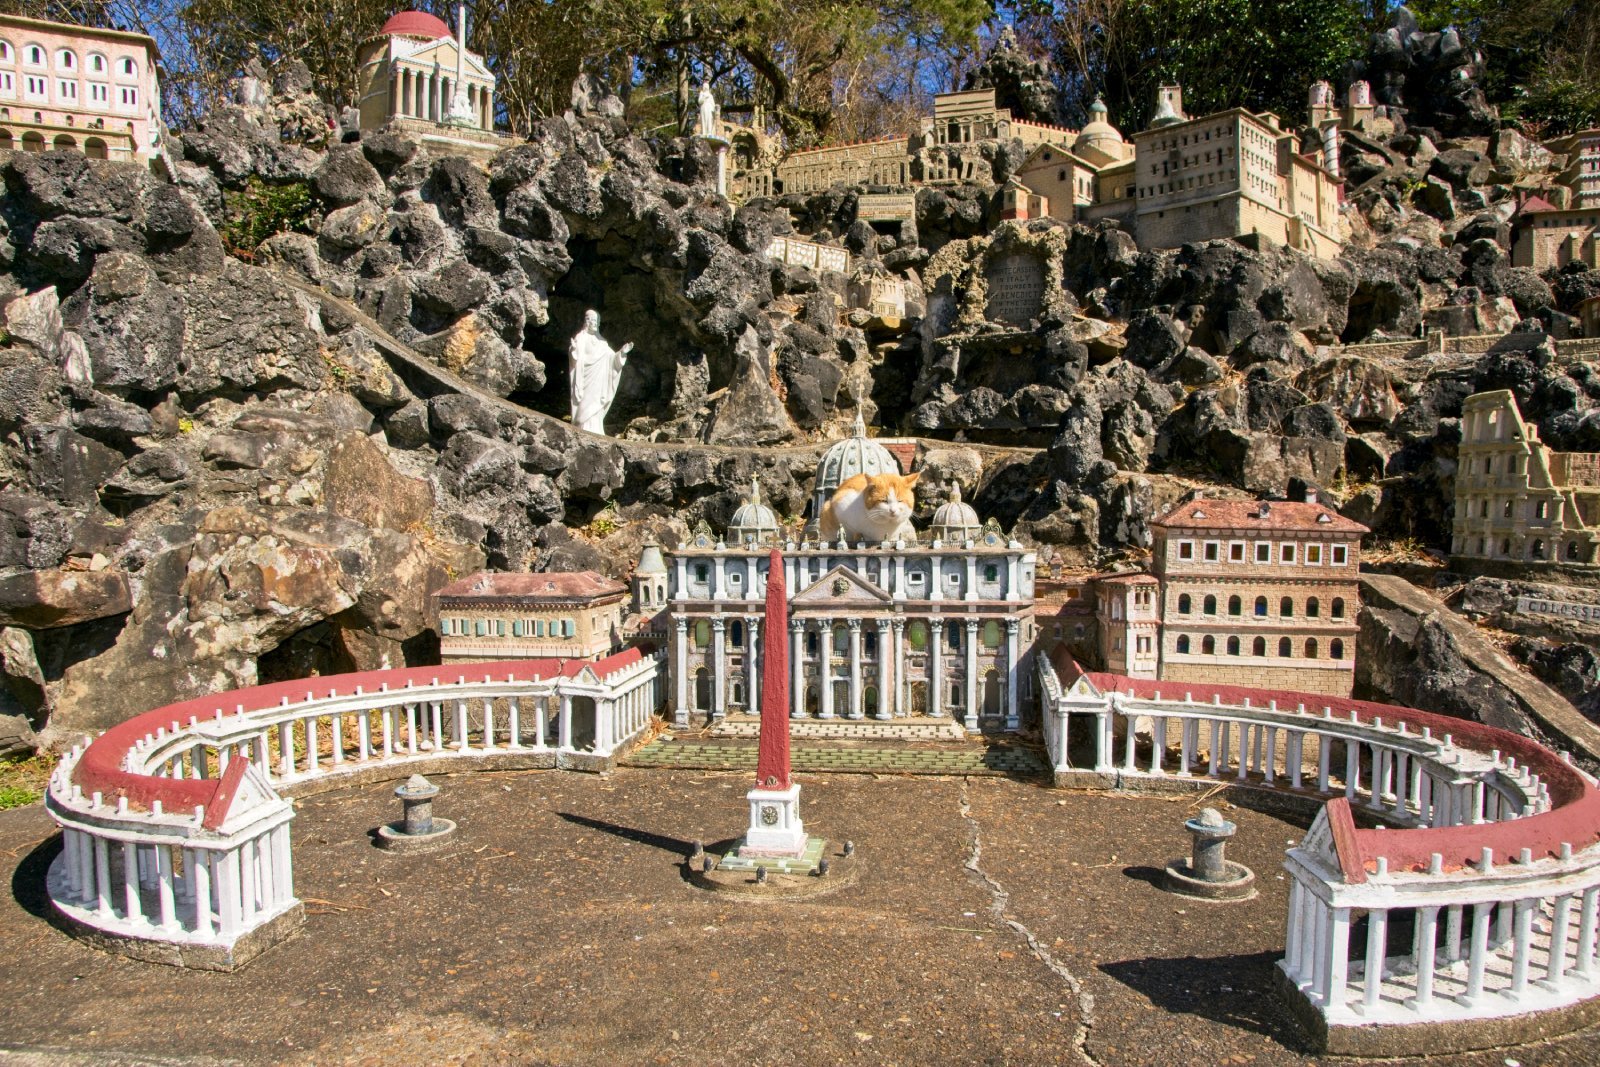 Image Credit: Shutterstock / Bennekom <p><span>Located in Cullman, this four-acre park is filled with miniature replicas of some of the most famous religious structures in the world, handcrafted with meticulous detail, offering a global pilgrimage in miniature.</span></p>